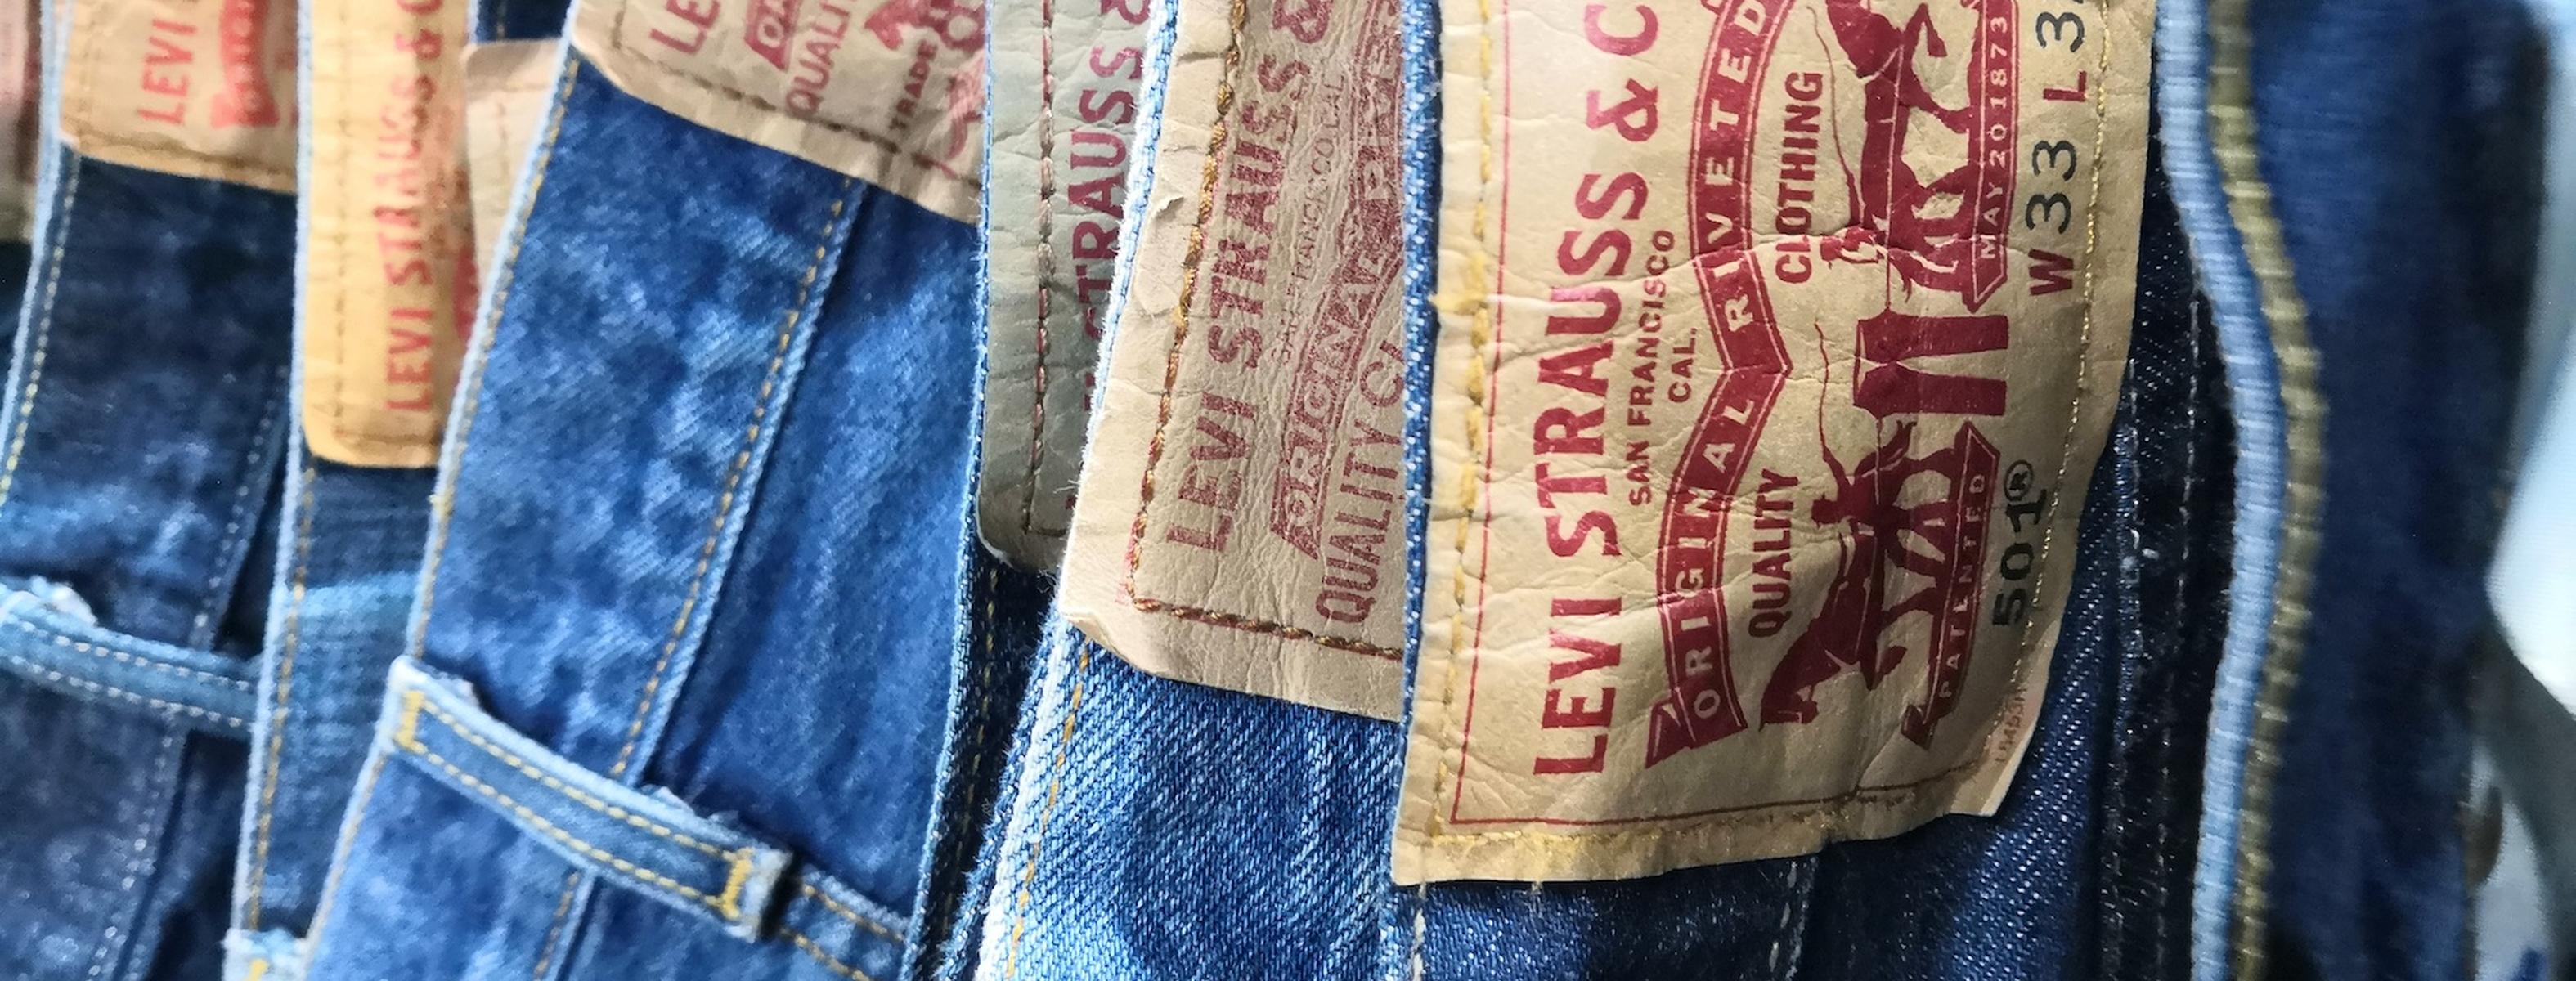 Levi's Vintage Clothing Needs Talent For a Gold Rush Photo Shoot